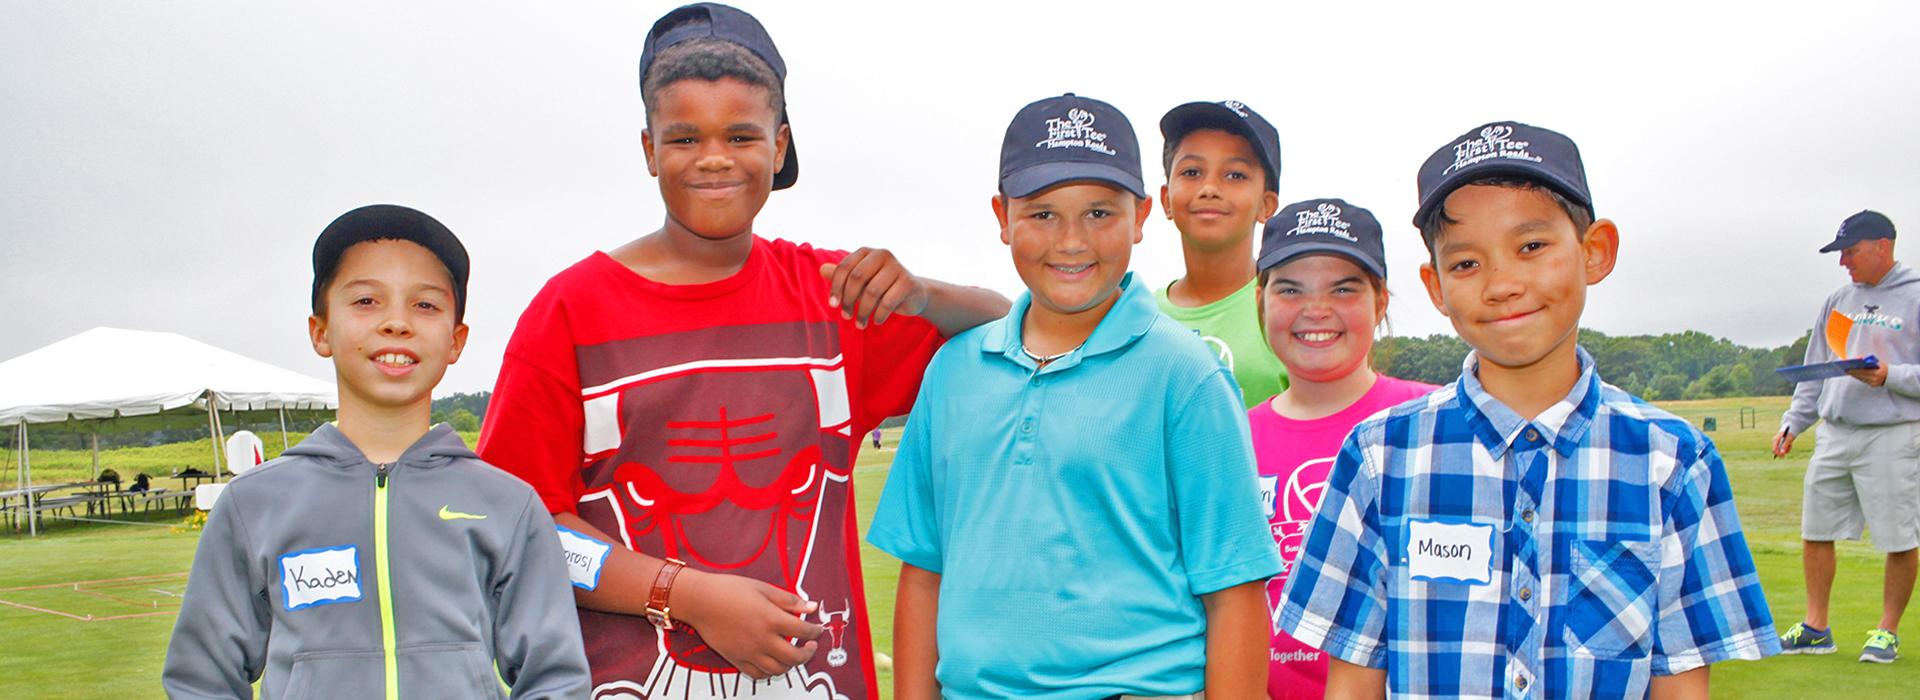 The First Tee of Hampton Roads children smiling